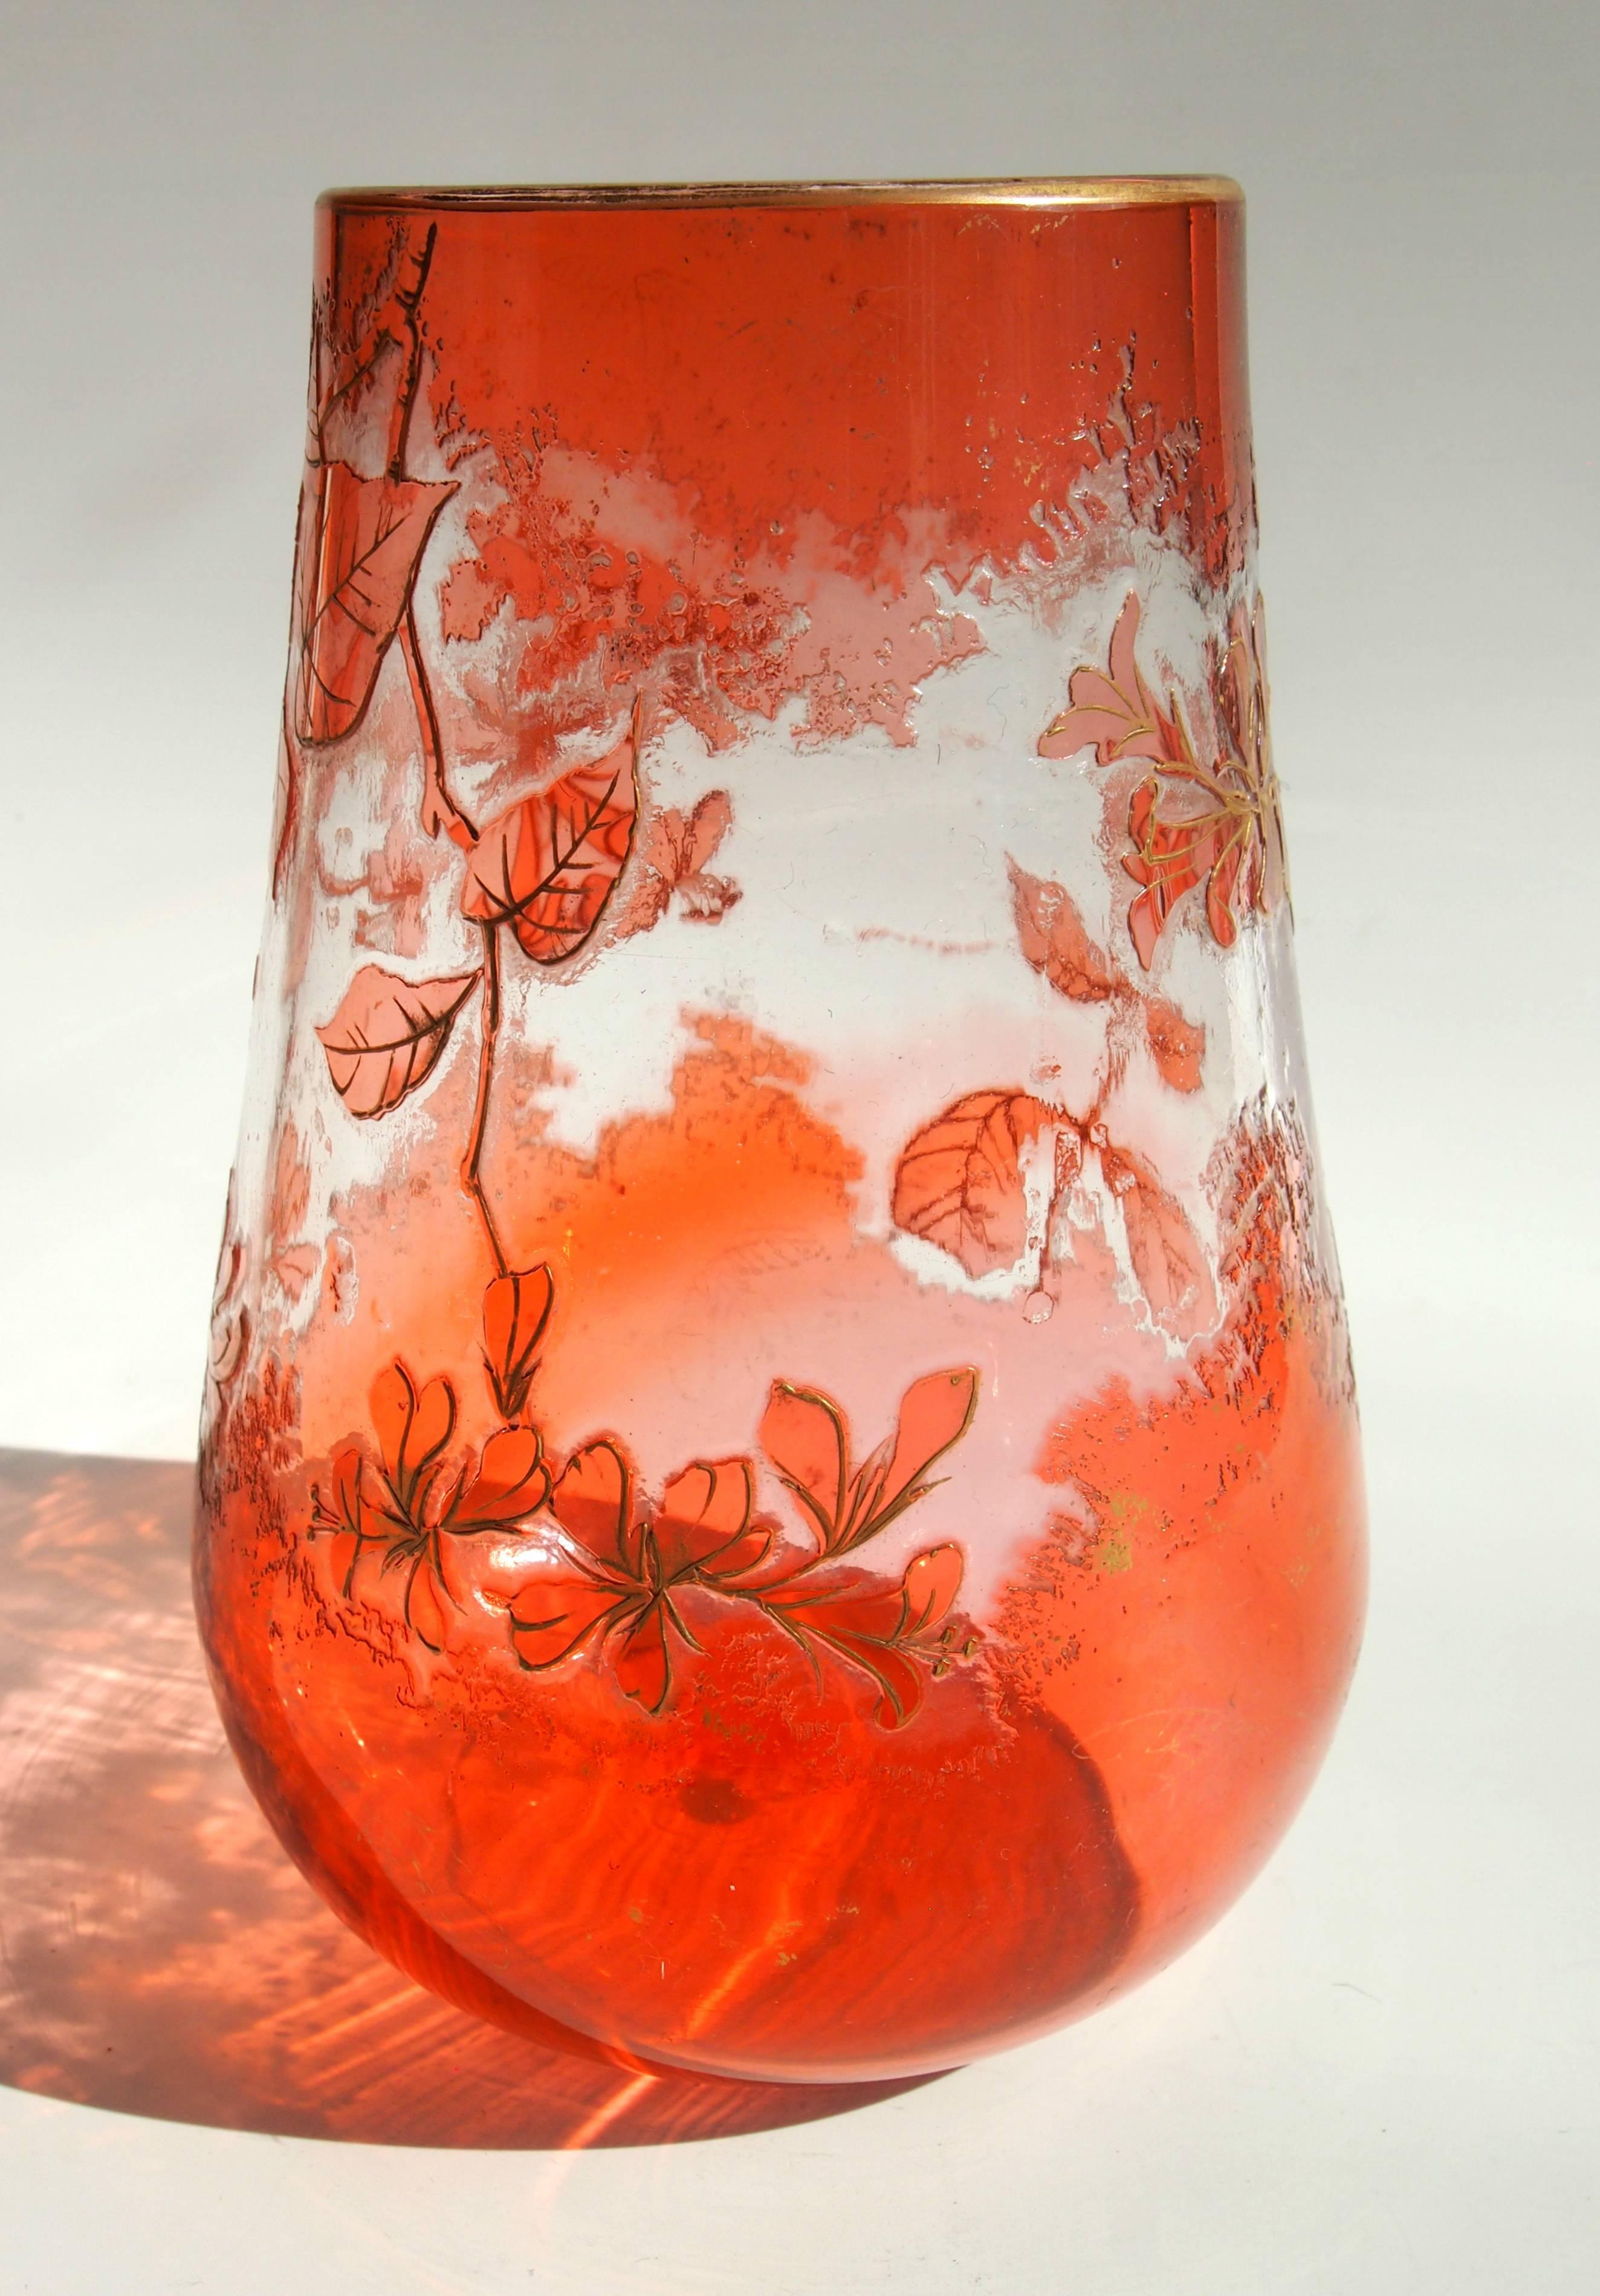 A vibrant Art Nouveau orange/pink over clear Harrach cameo vase. Depicting flowers highlighted with gilding. This style of Cameo was taken by Harrach to the 1900 Paris exhibition. Their stylized cameo technique employed an icicle effect -visible